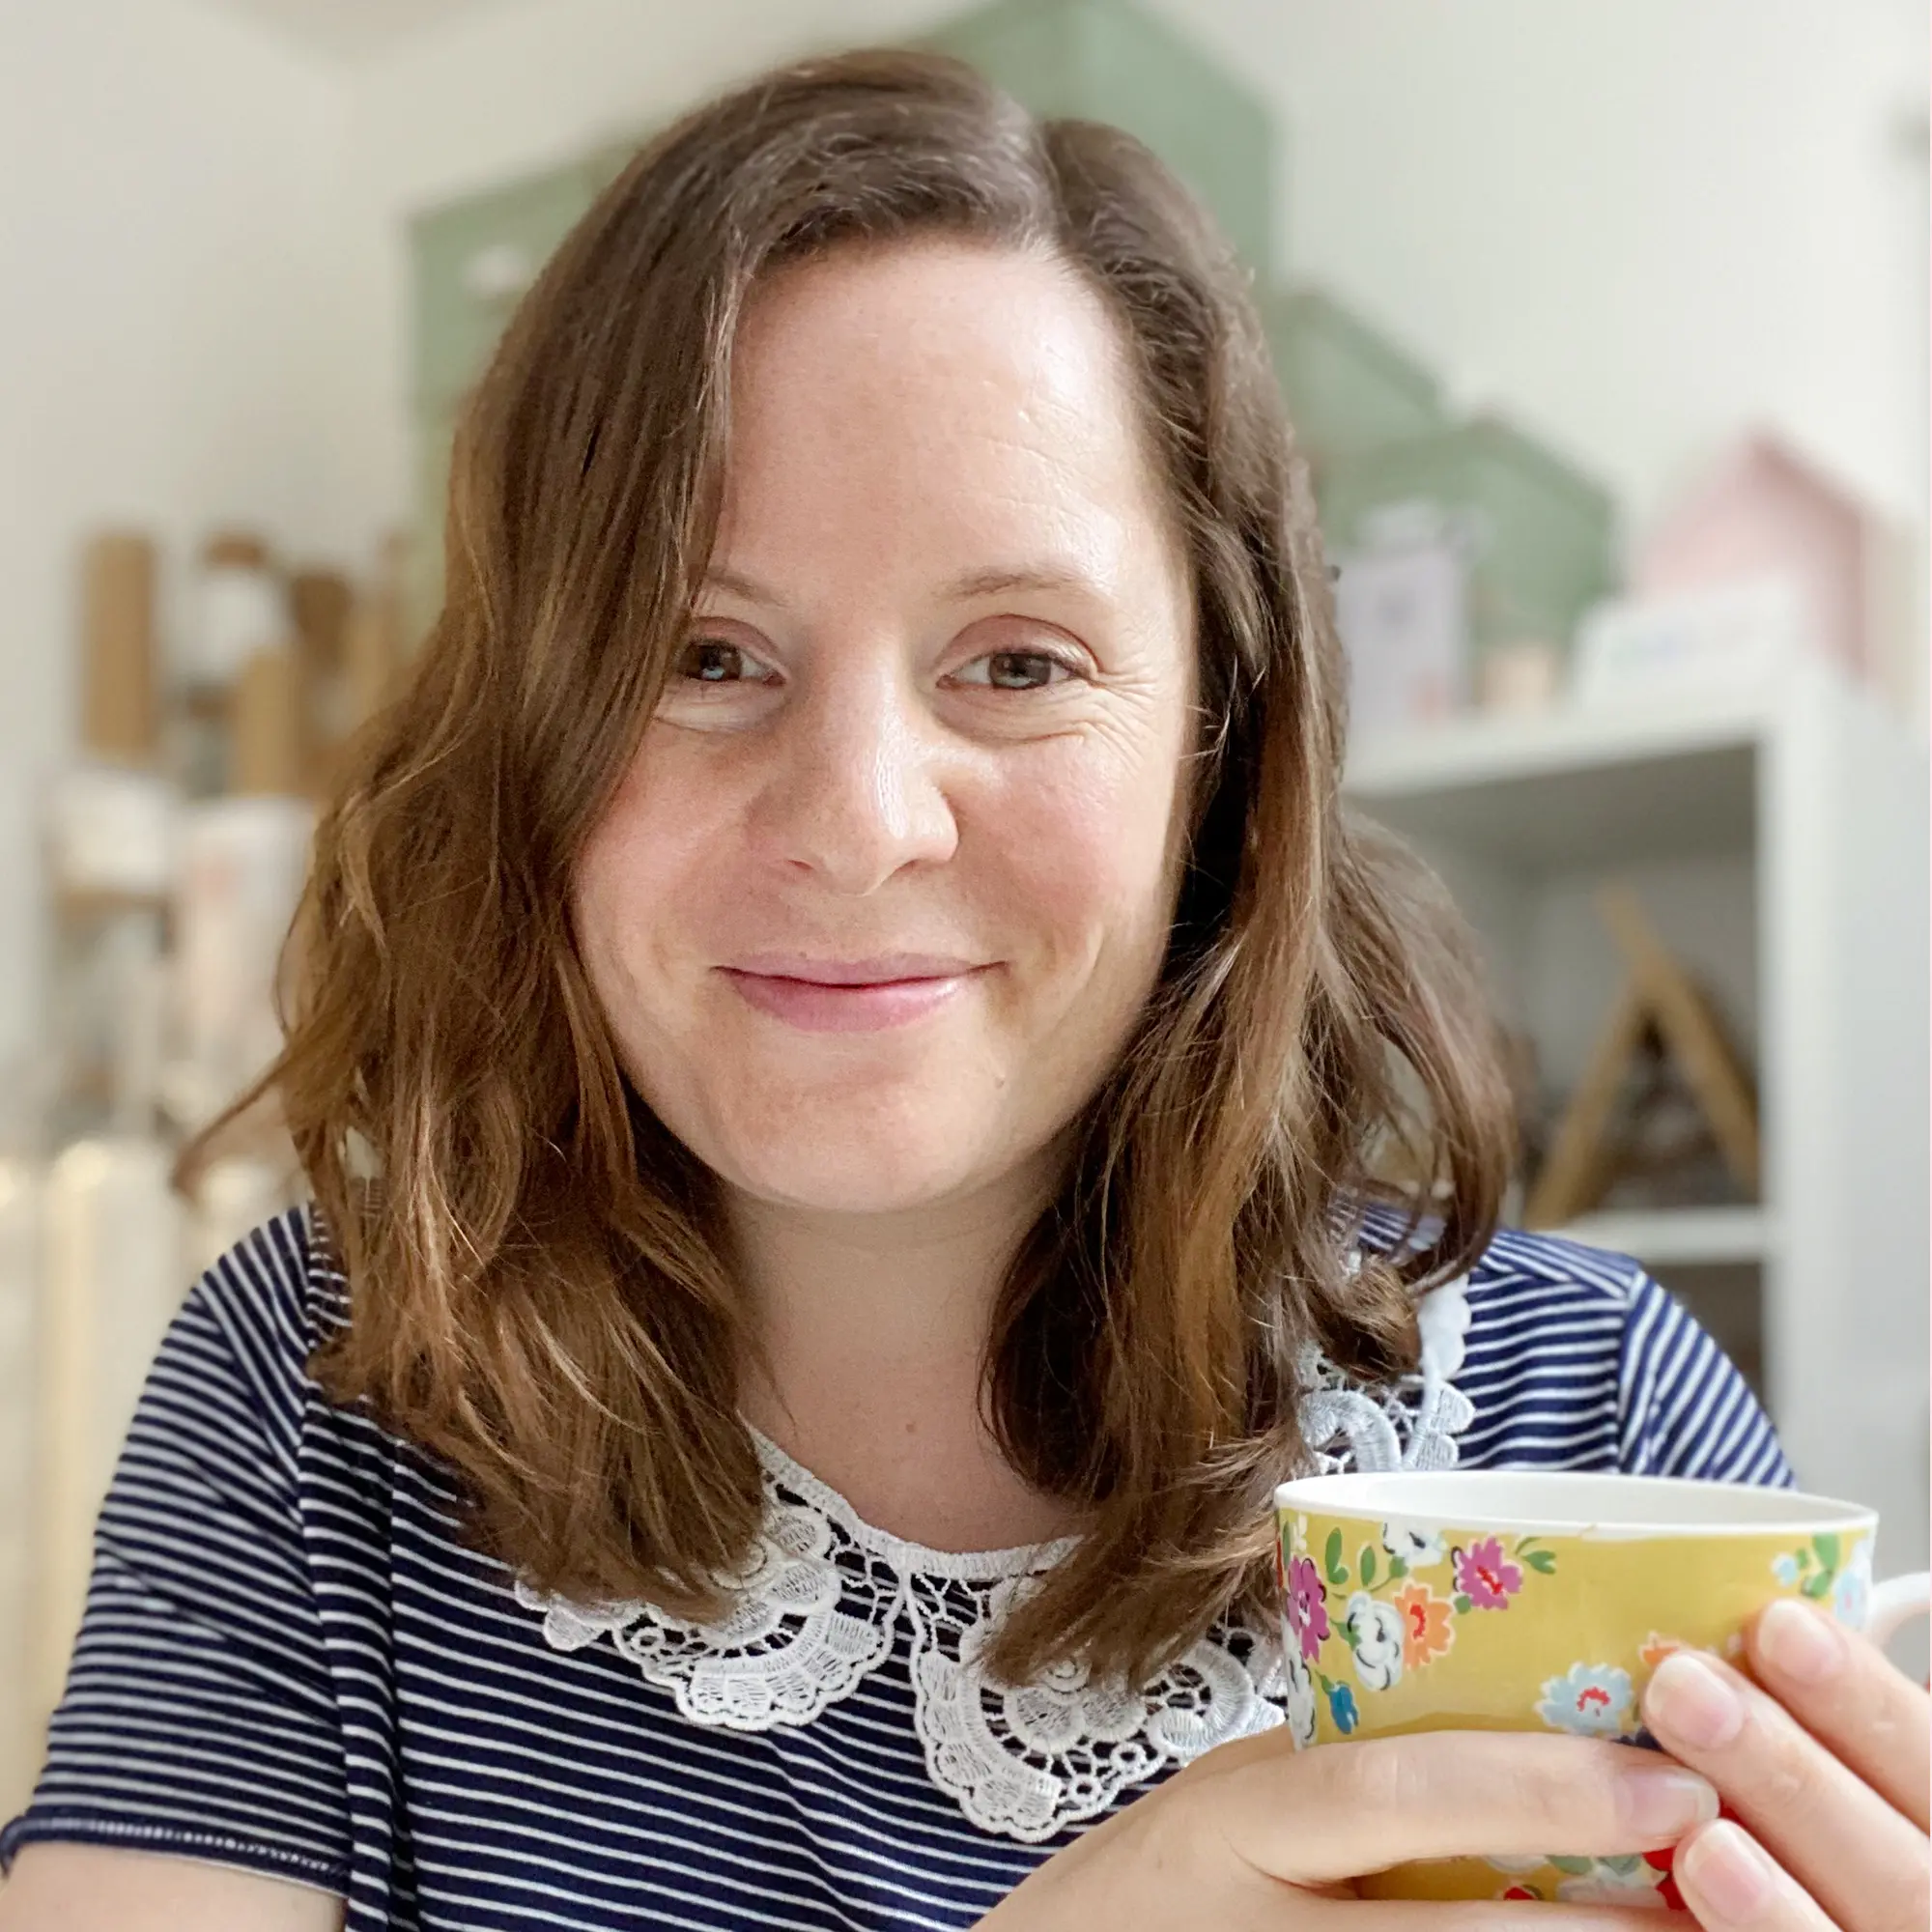 Laura Clempson the founder of Clara and Macy sits in her office, holding a cup of tea and wearing a blue striped top with lace collar.